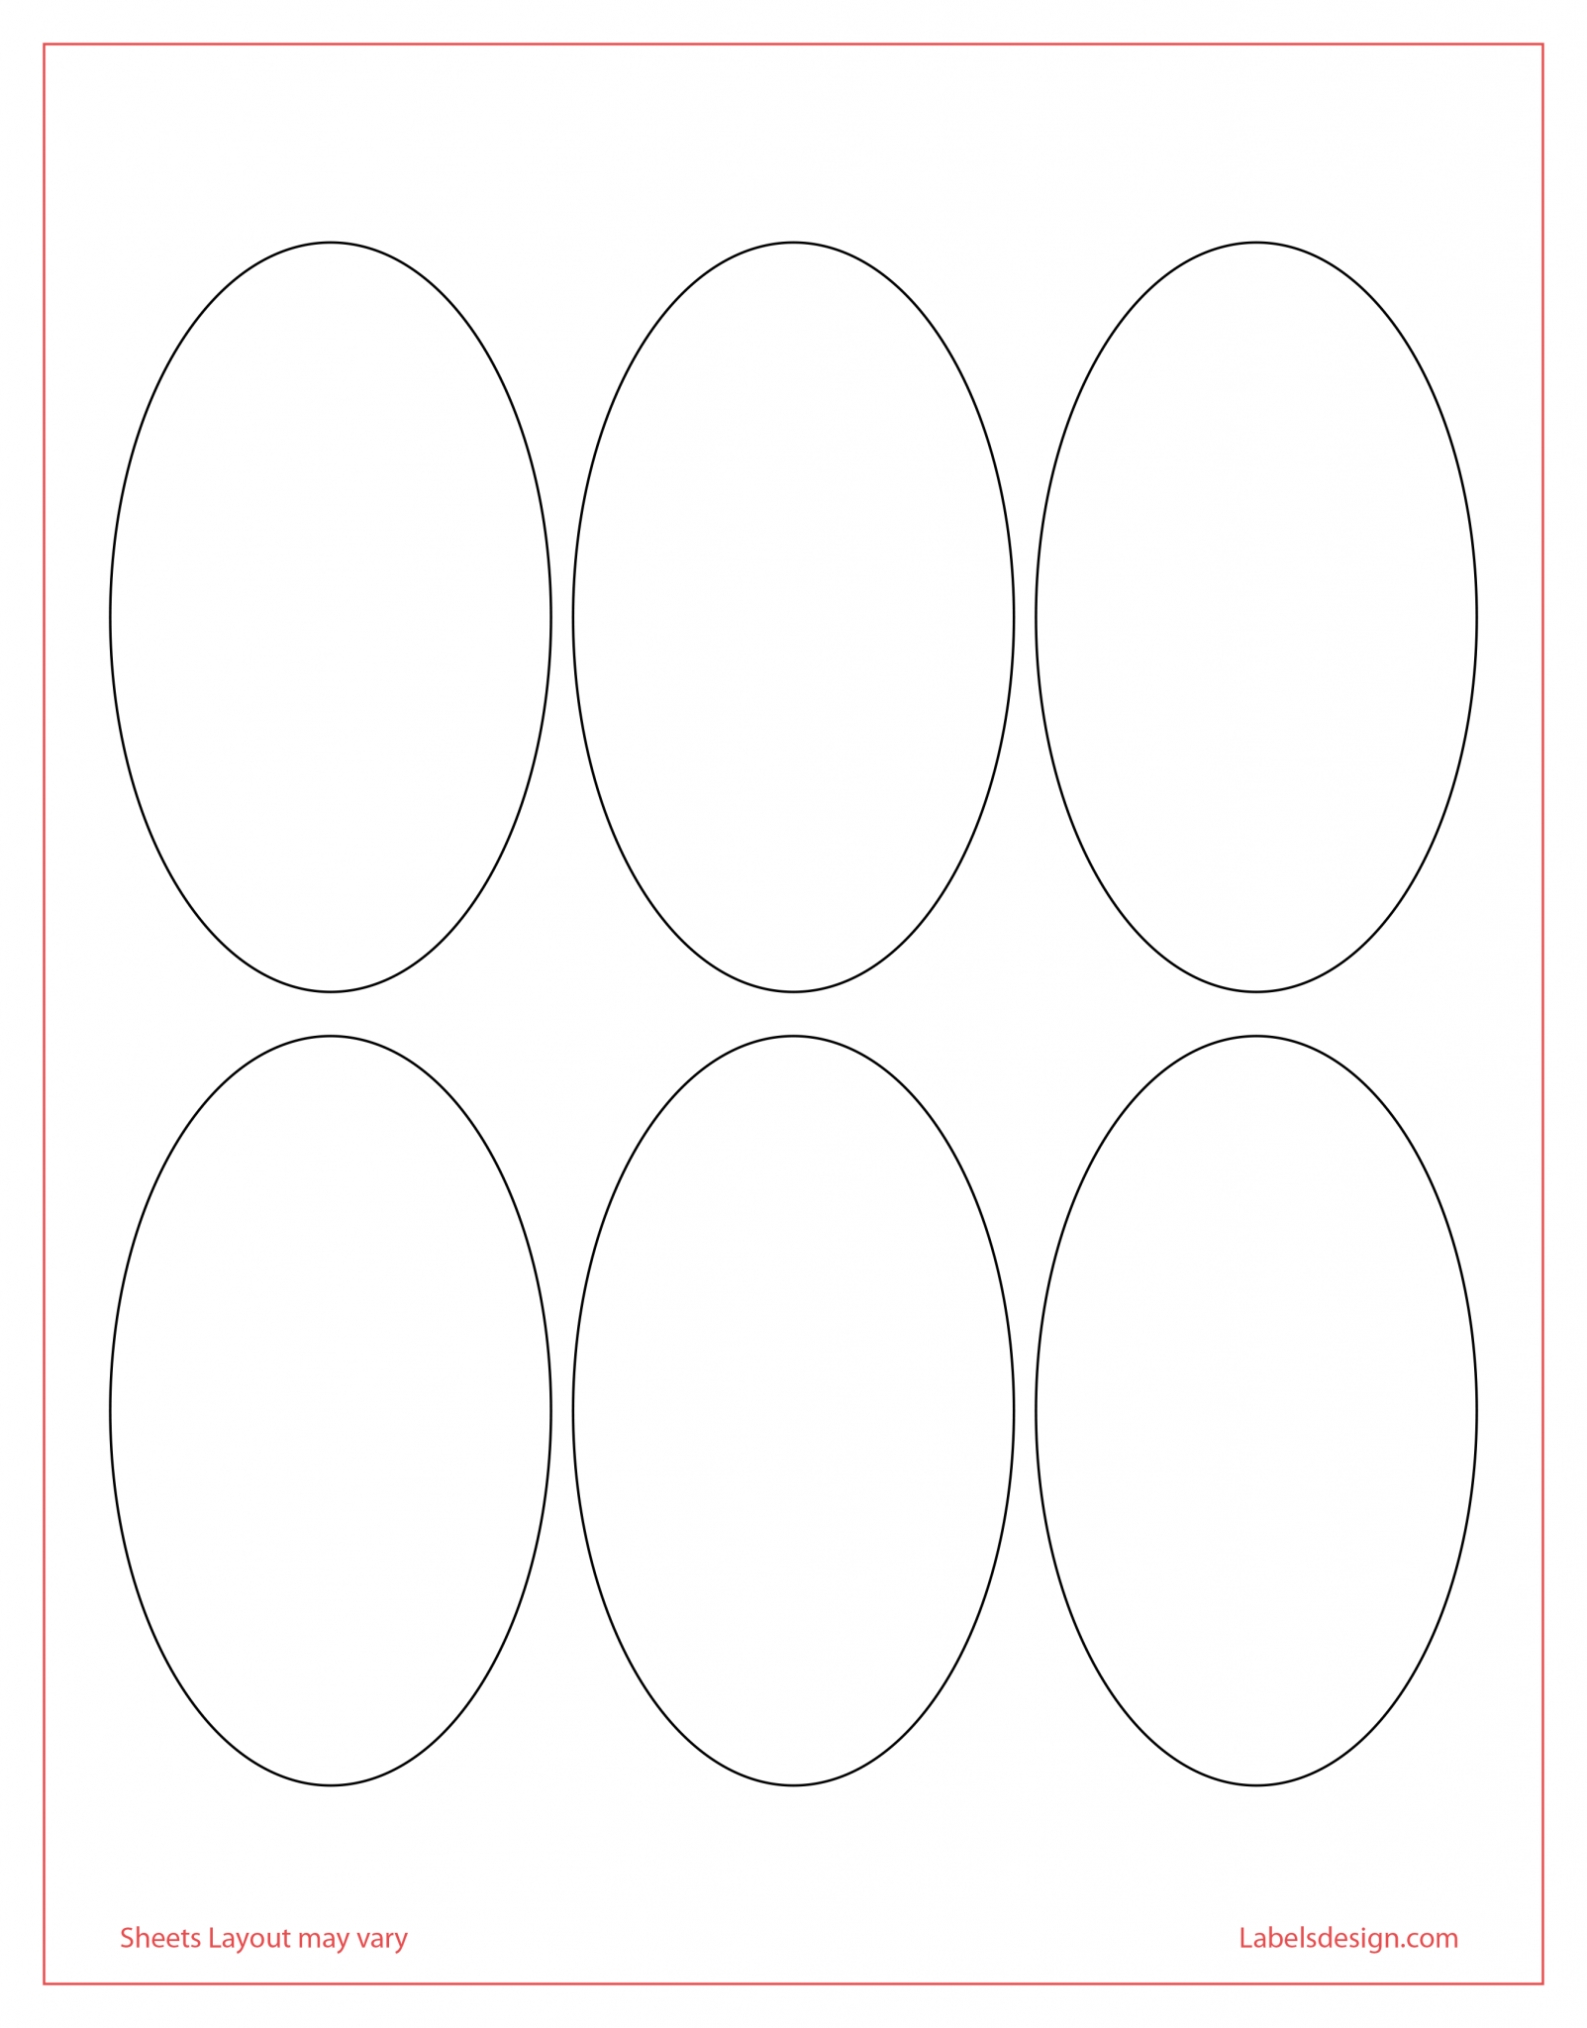 4.25 X 2.5 Inch Oval - Labelsdesign Pertaining To 4 X 2.5 Label Template